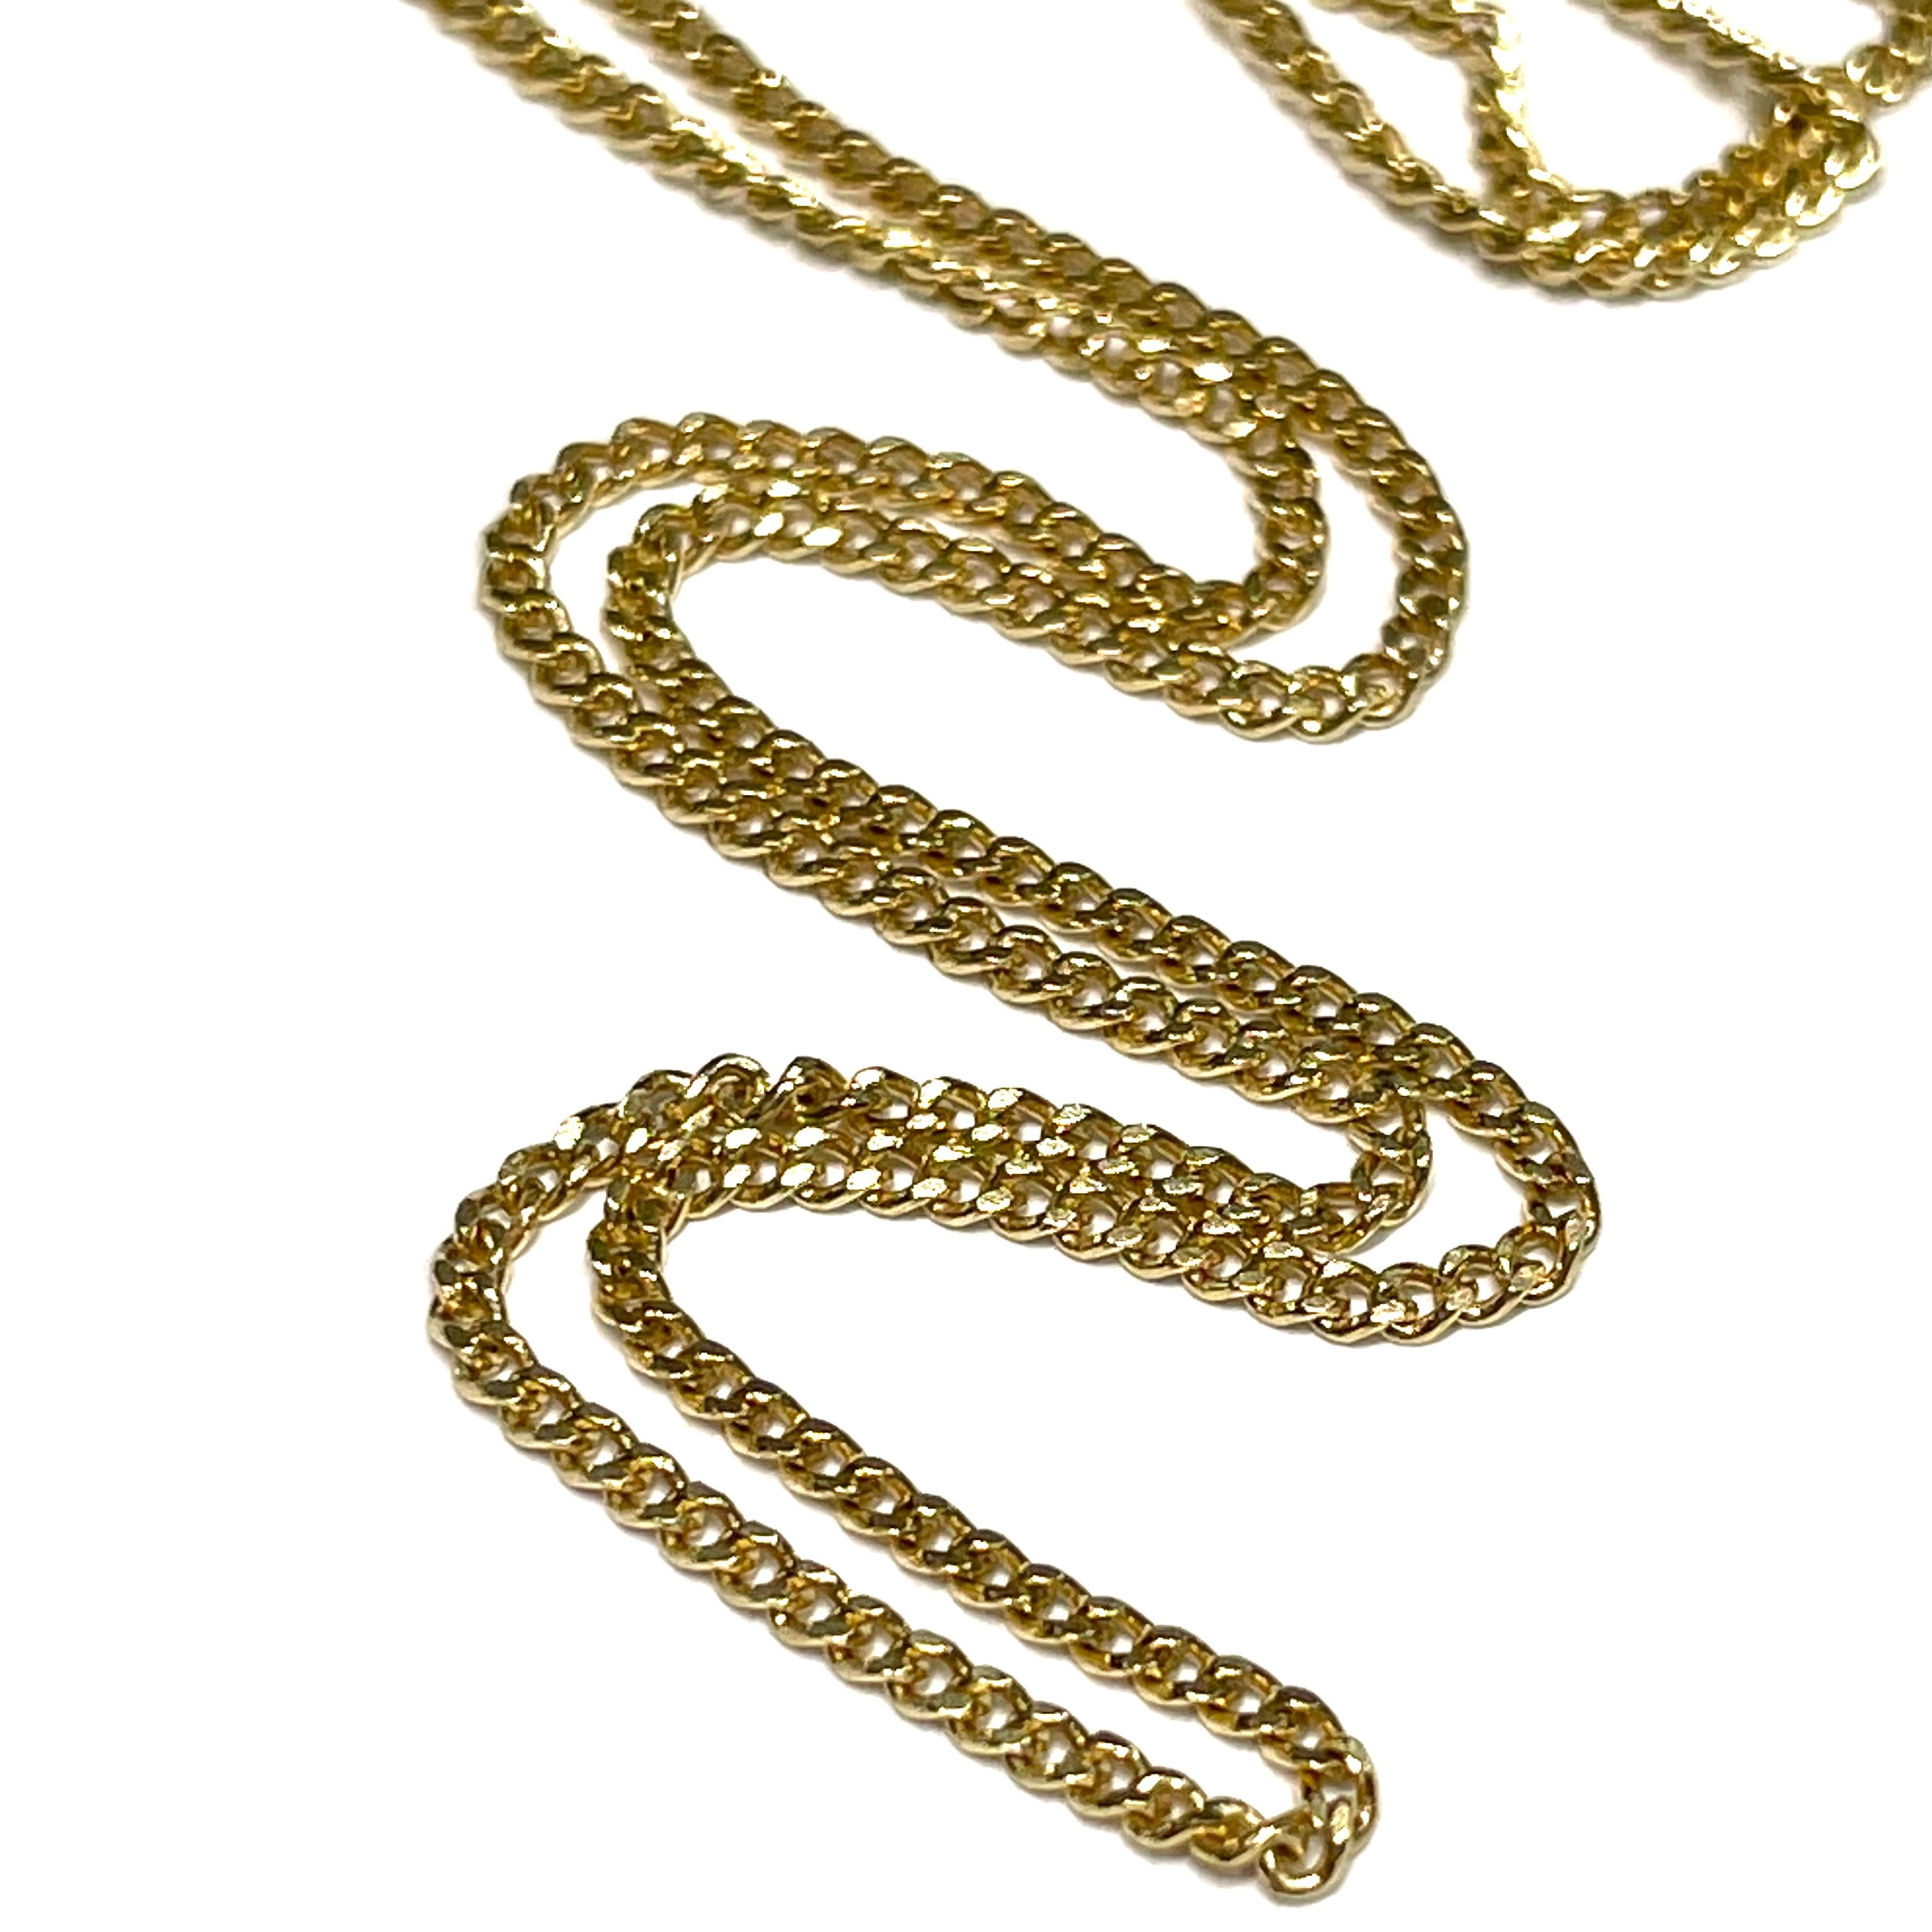 18" 18k Yellow Gold Curb Link Chain